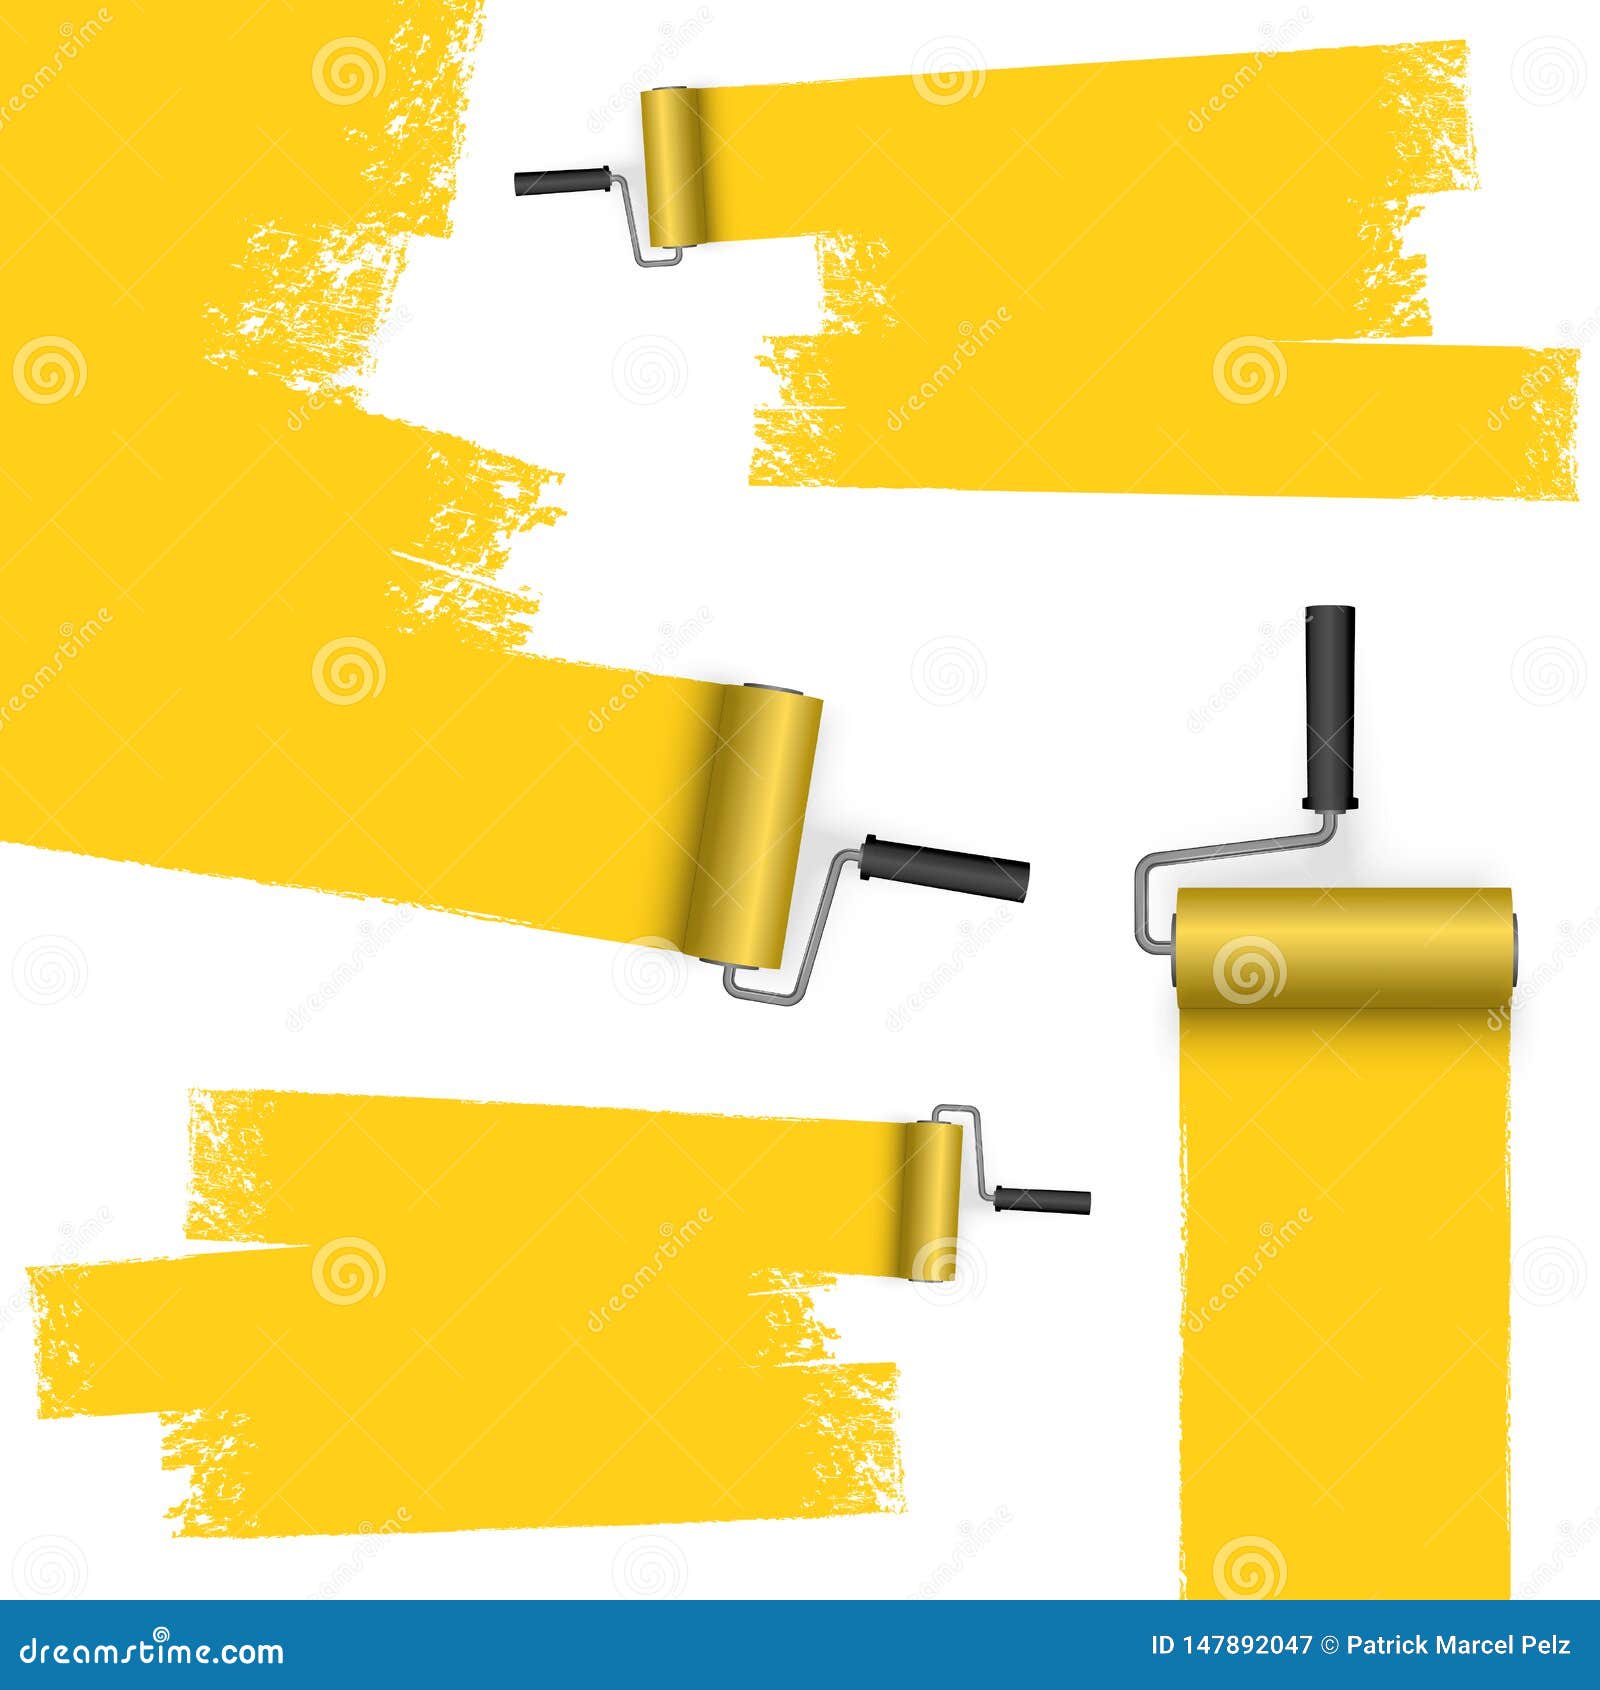 Paint Roller Concept with Markings Stock Vector - Illustration of renew ...